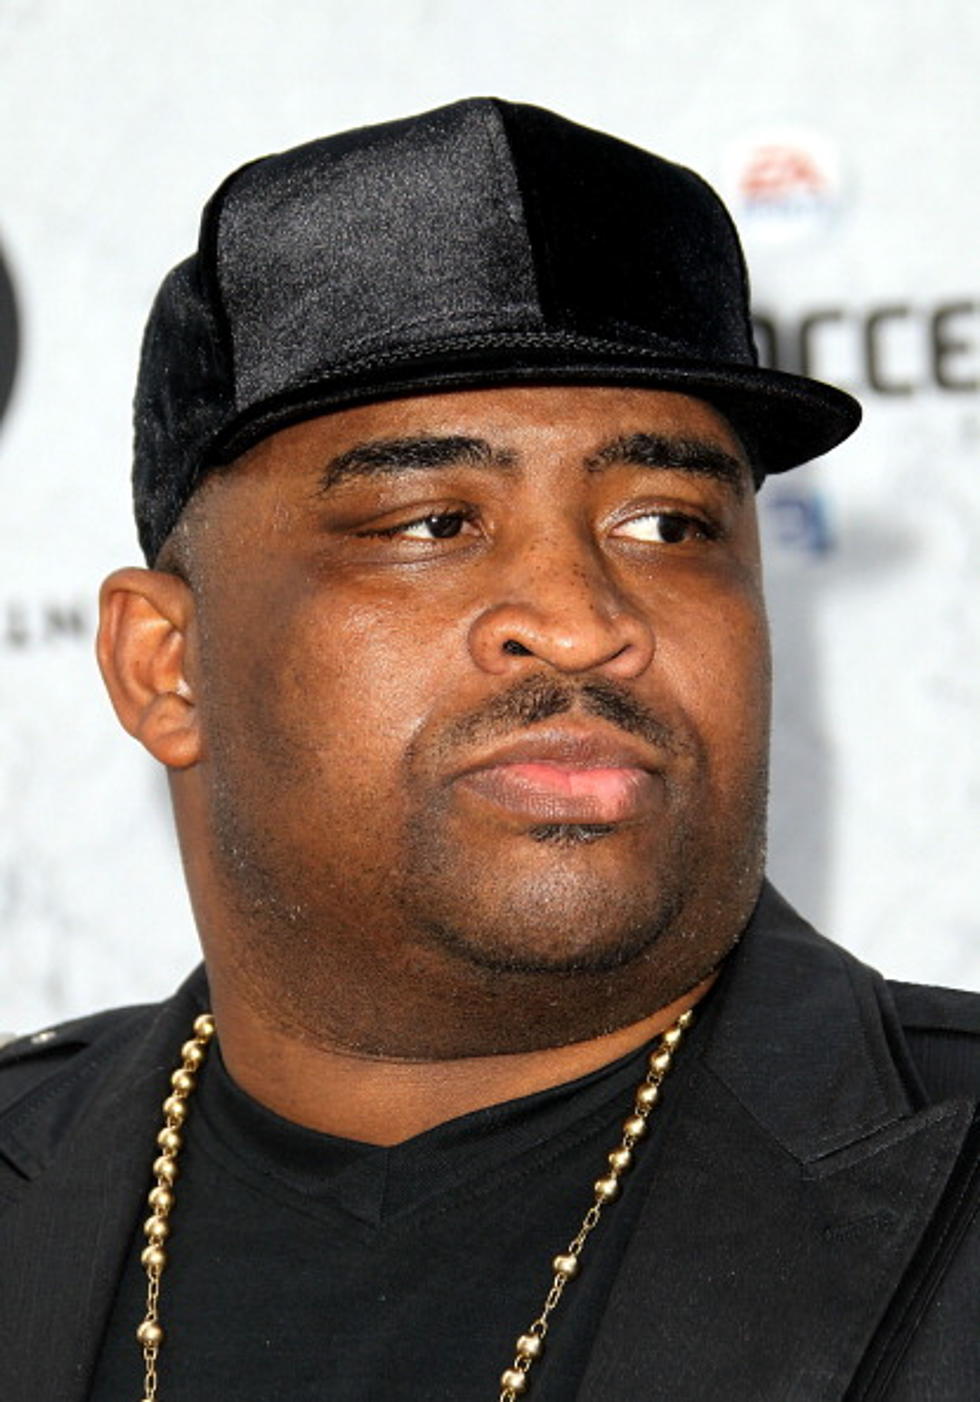 R.I.P. Patrice O’Neal. A Few Of My Fav Clips From The Comedian. [Video]